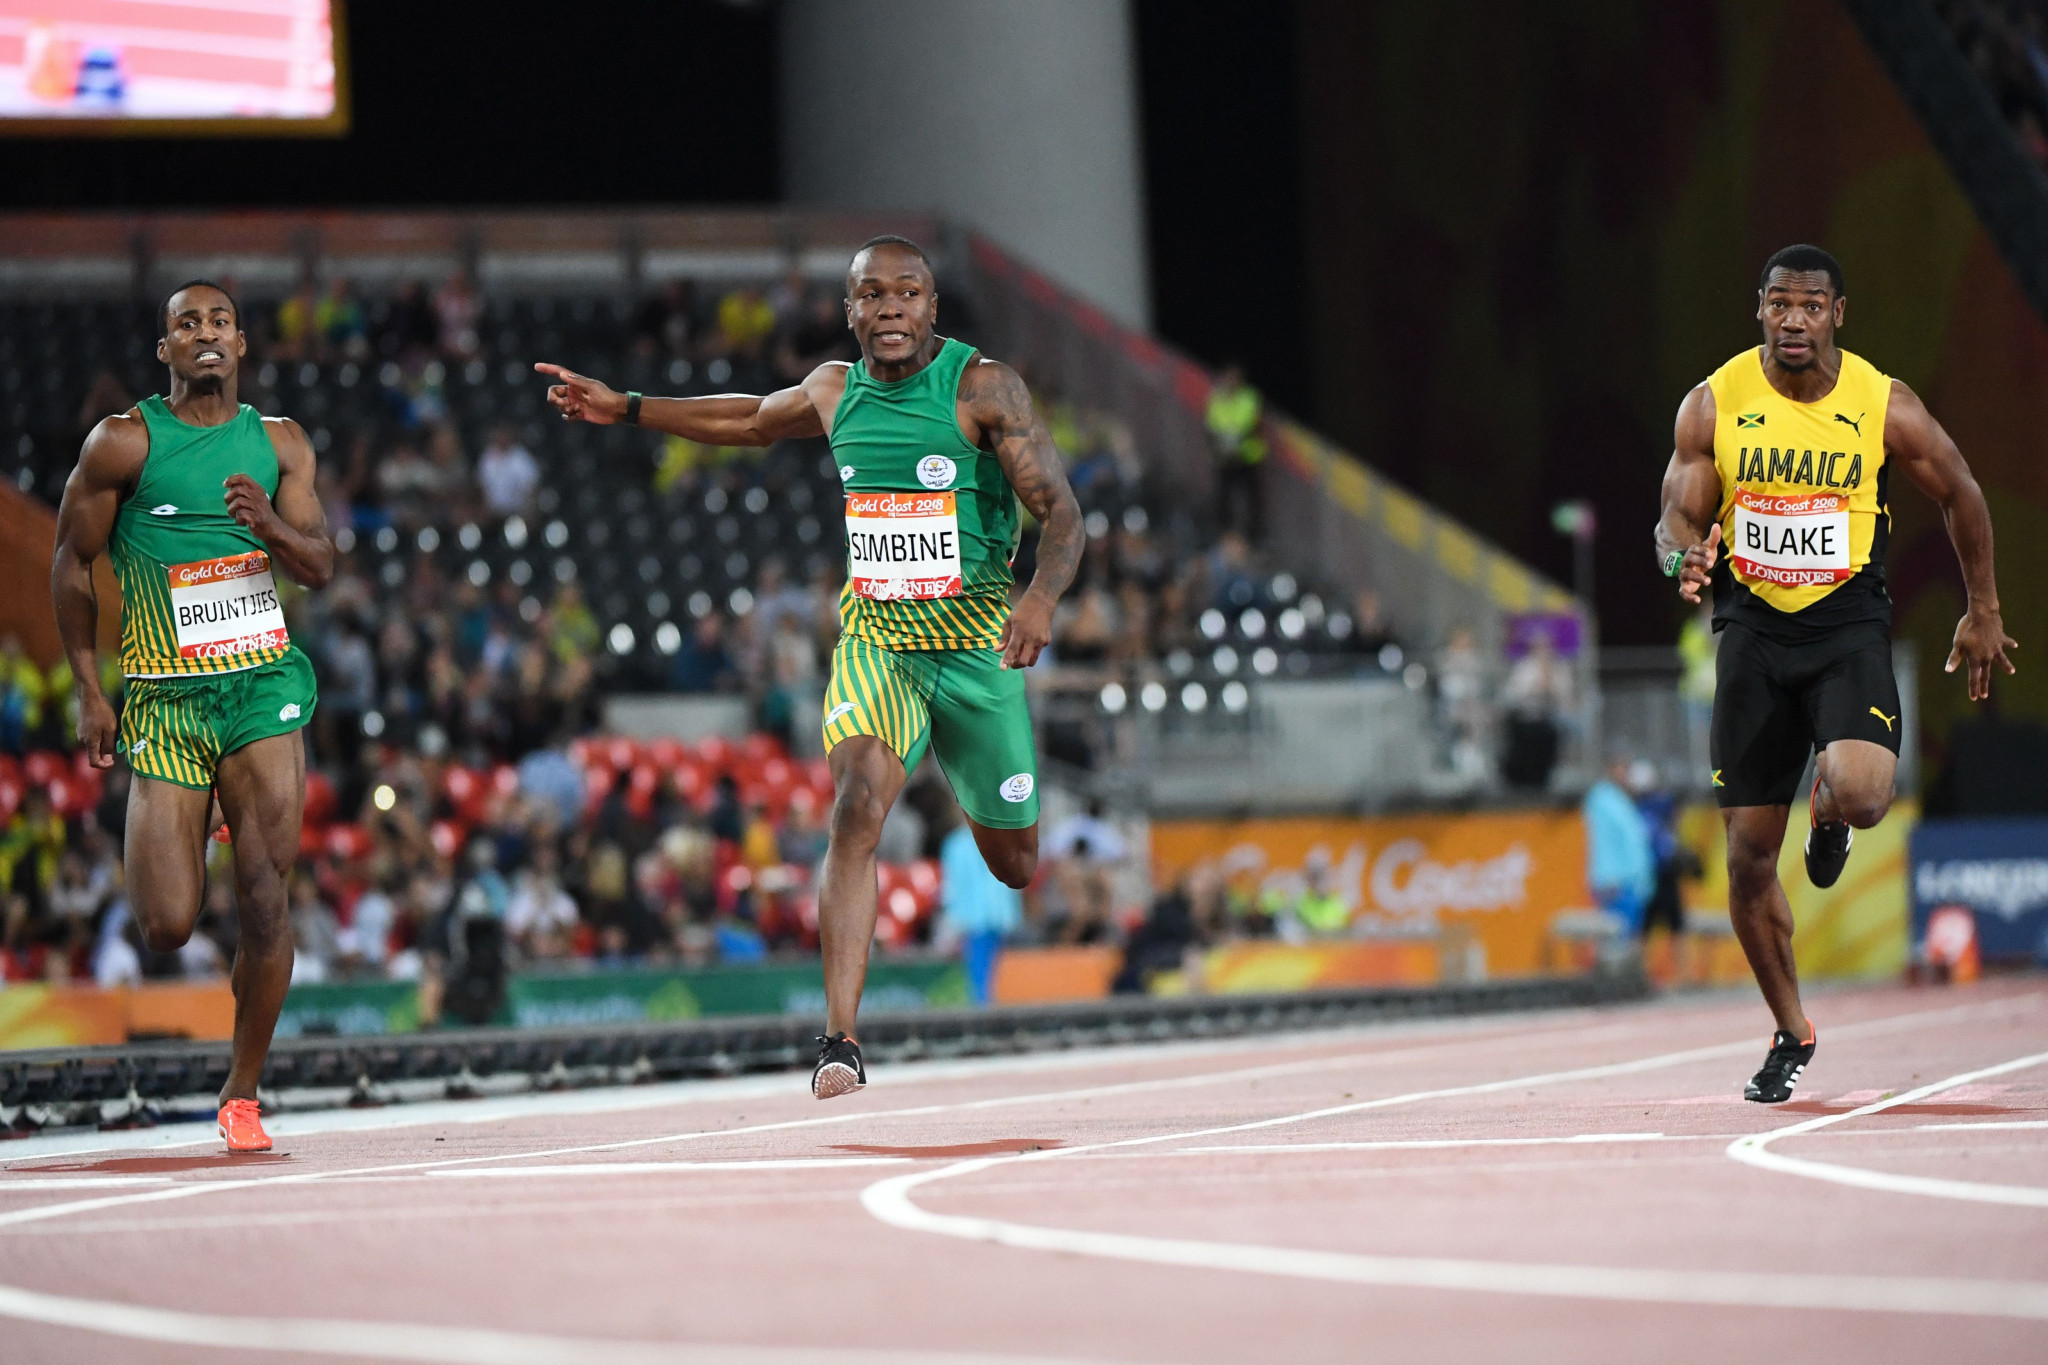 South Africa's Akani Simbine stunned a field including former world champion Yohan Blake to win the men's 100 metres gold medal on day five of the Gold Coast 2018 Commonwealth Games ©Getty Images